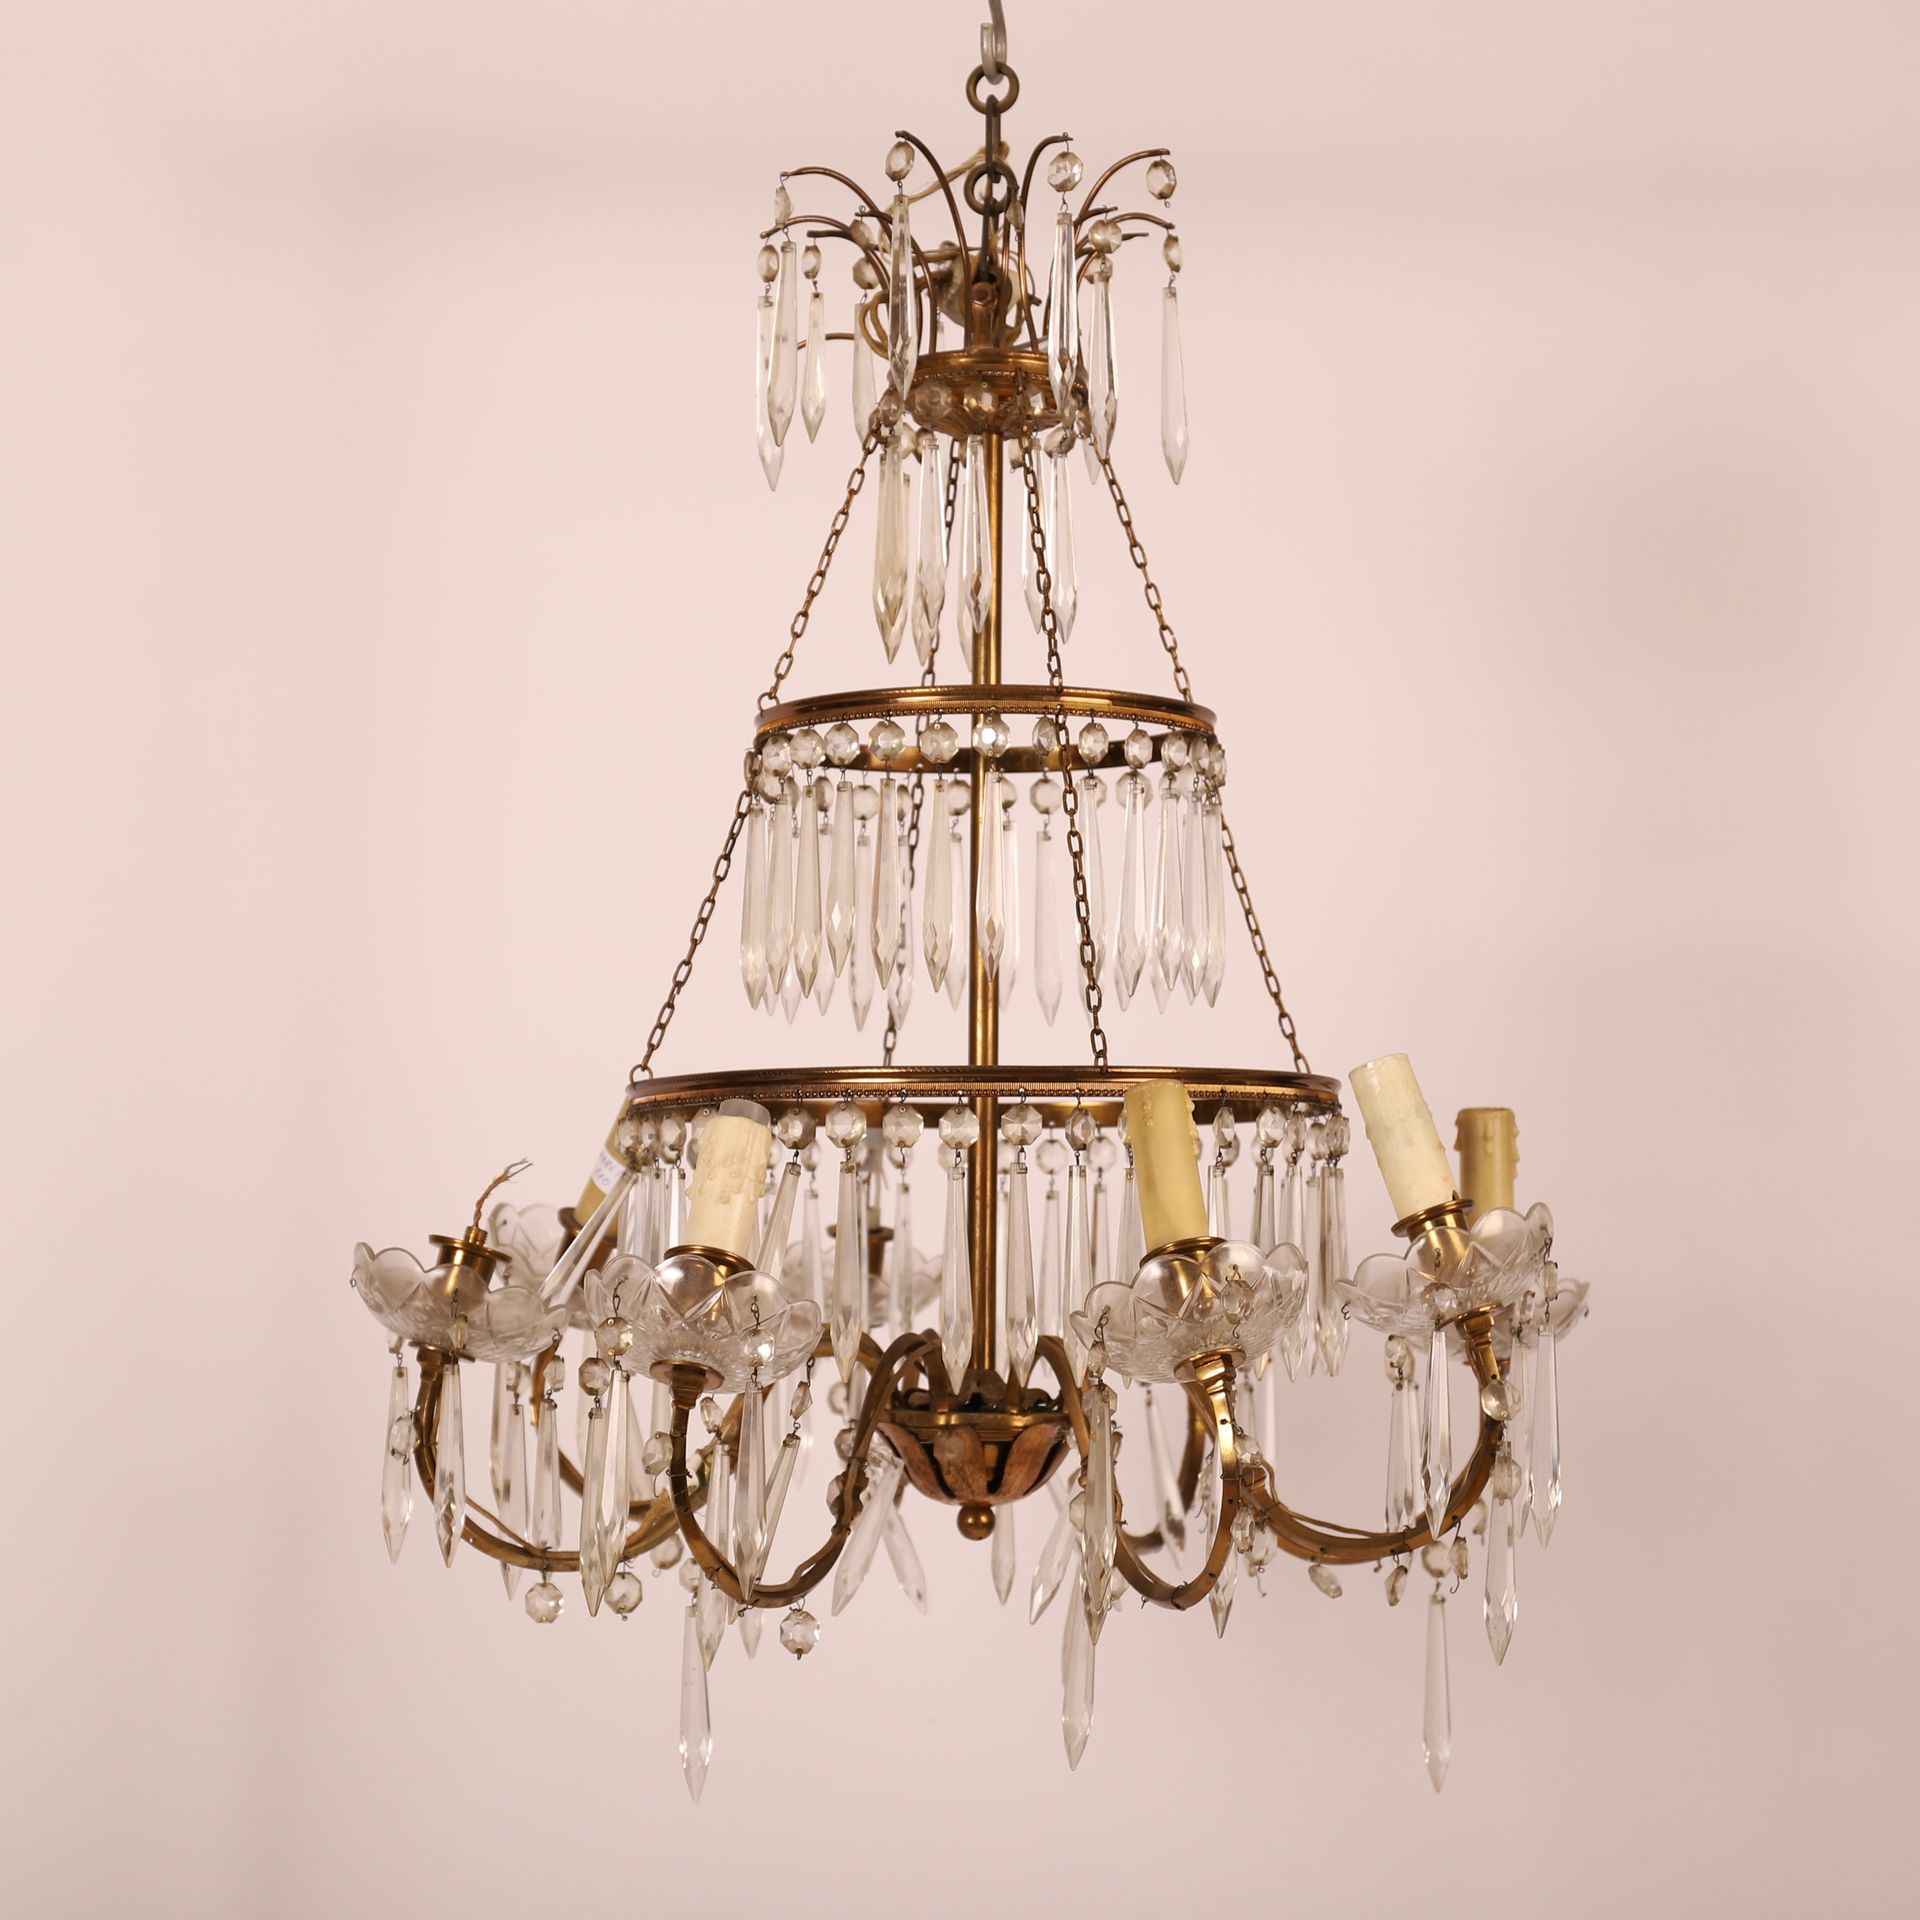 Null CHANDELIER WITH EIGHT ARMS OF LIGHT

Gilt bronze and faceted crystal pendan&hellip;